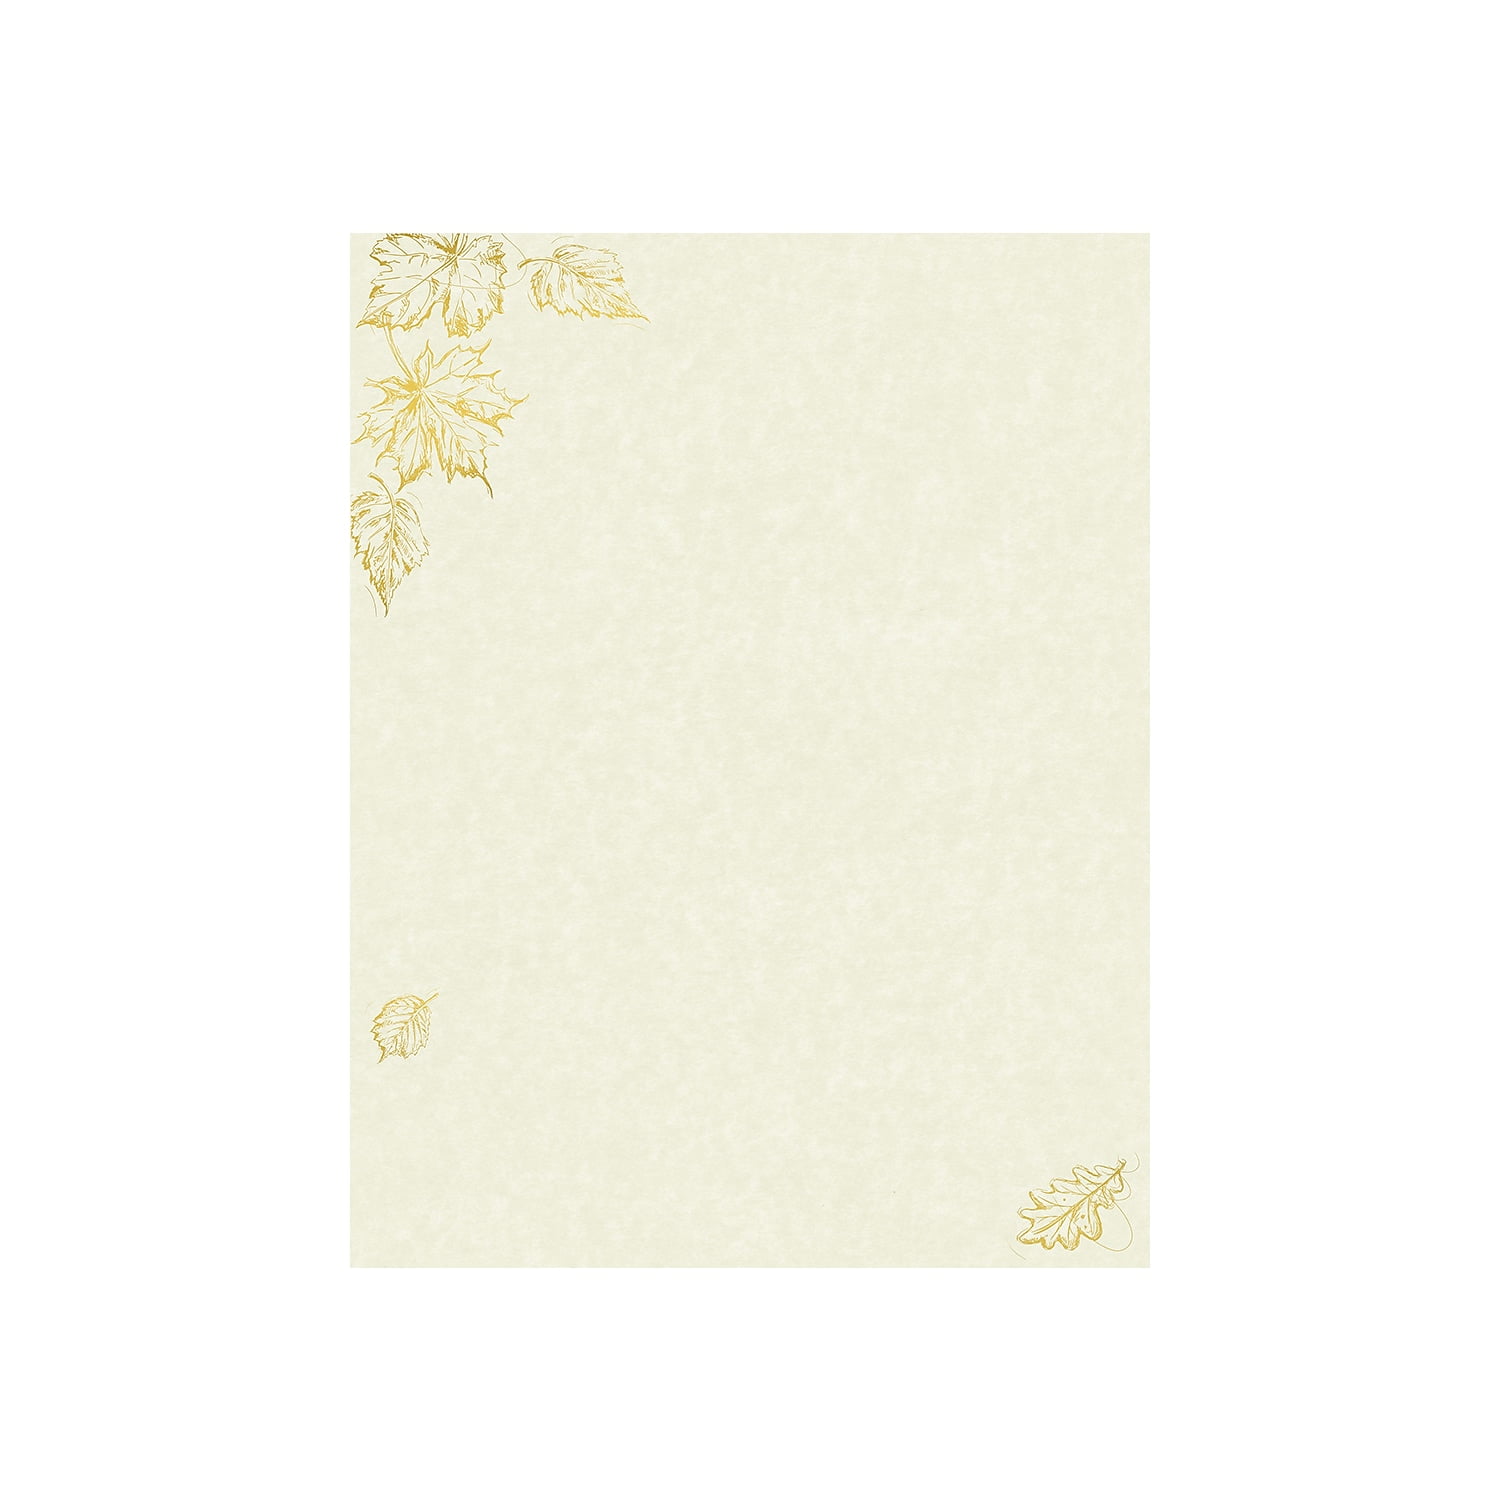 50Pcs A4 Paper Sheets Parchment Retro Paper for Certificate and Diploma 90g  (Light Brown)